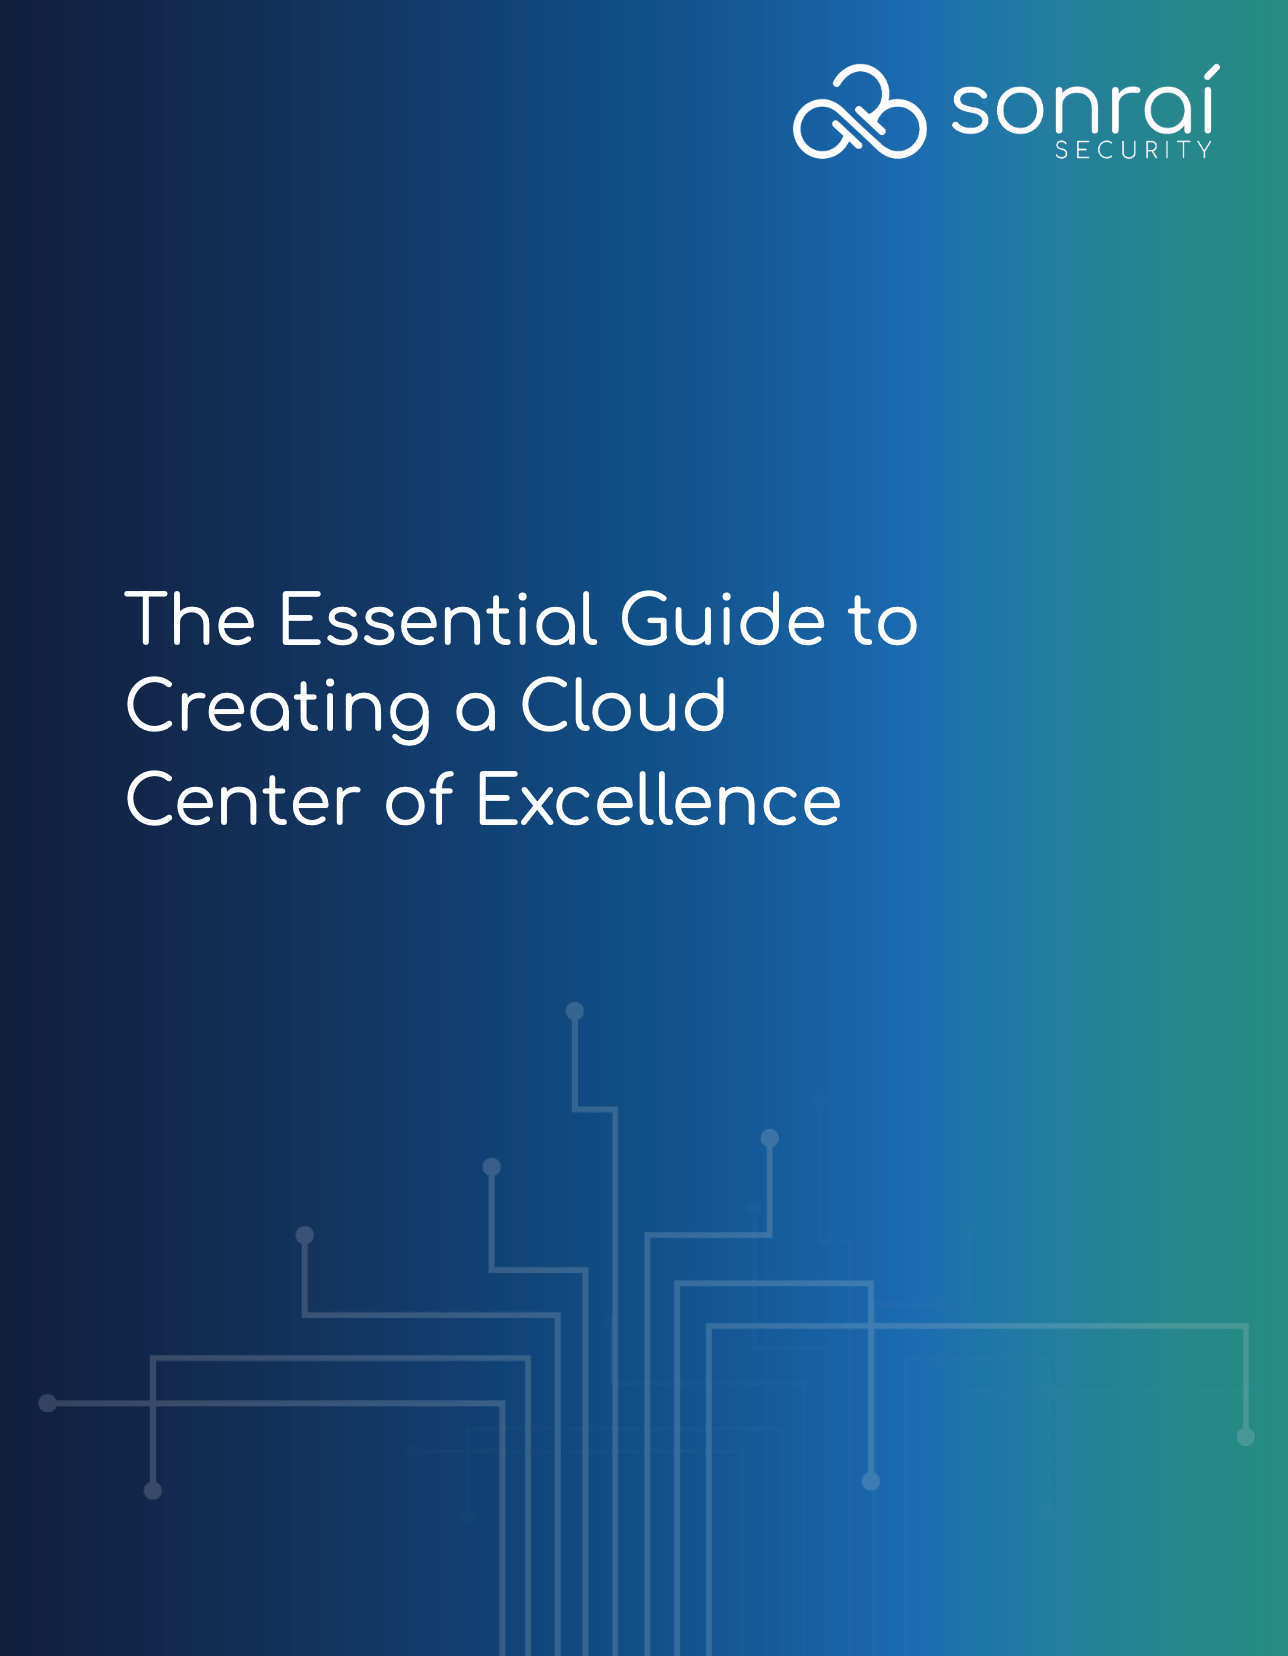 The Essential Guide sonrai cover - The Essential Guide to Creating a Cloud Center of Excellence (CCoE)